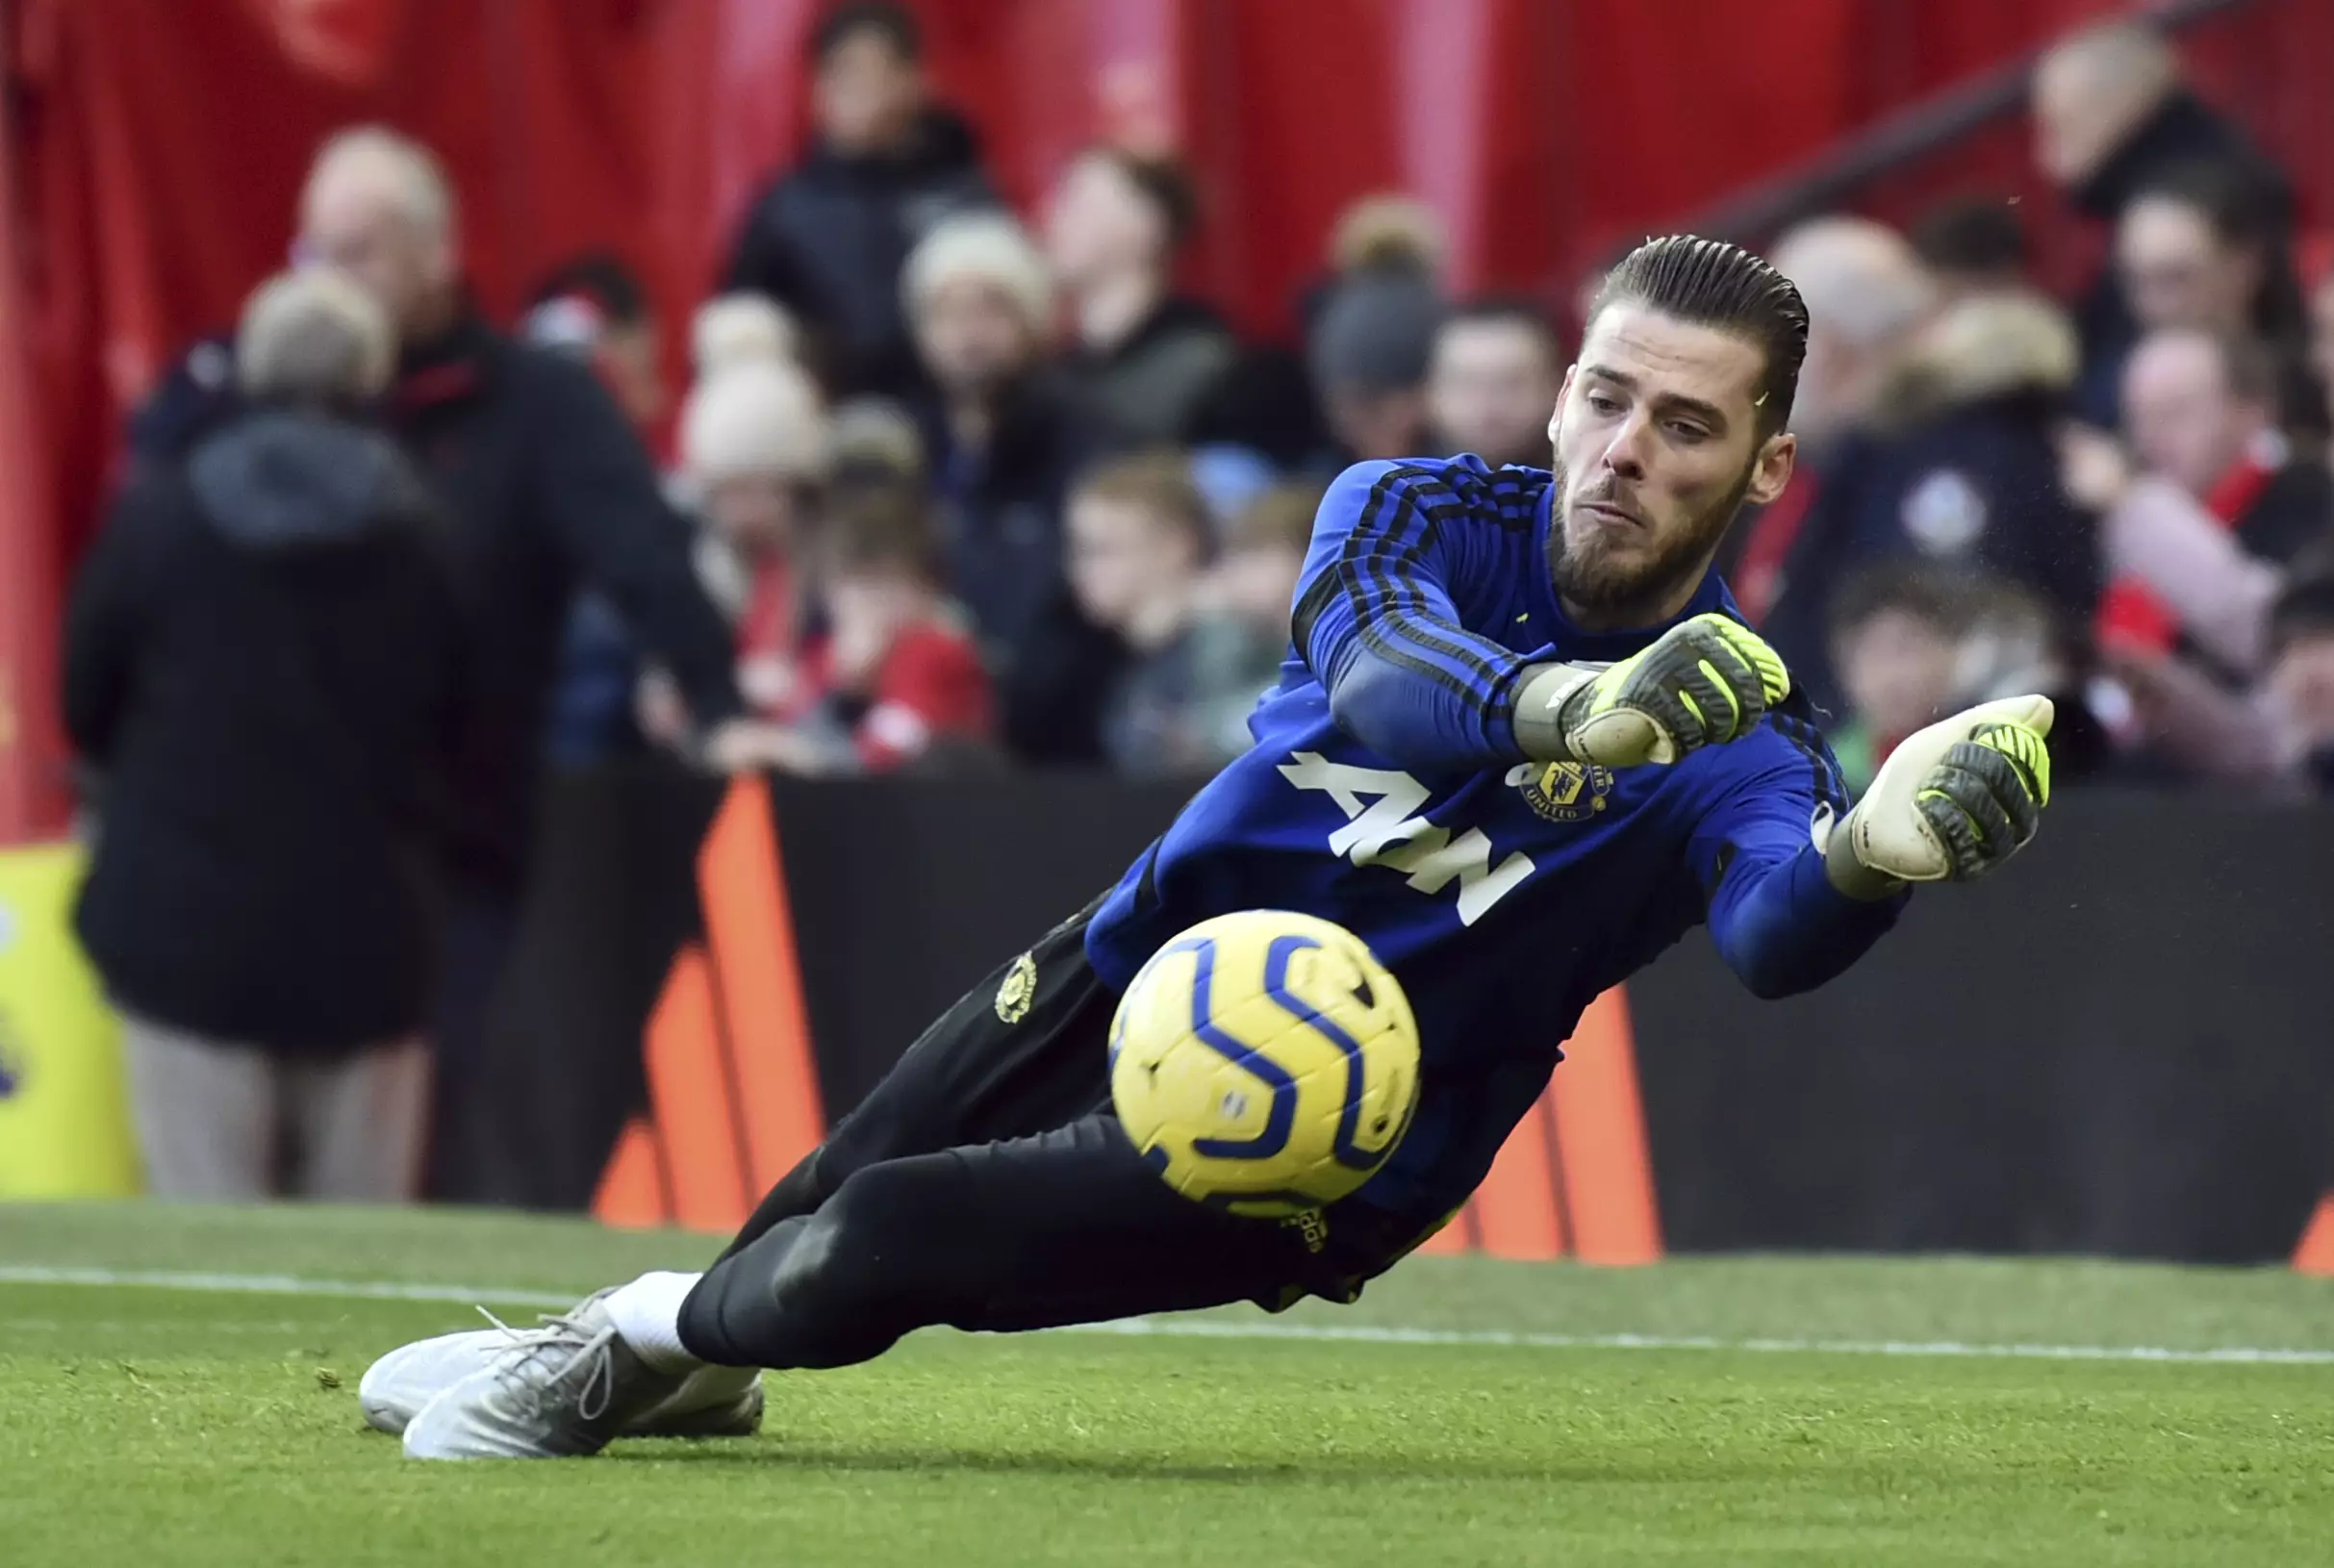 David de Gea is Manchester United's highest-paid player